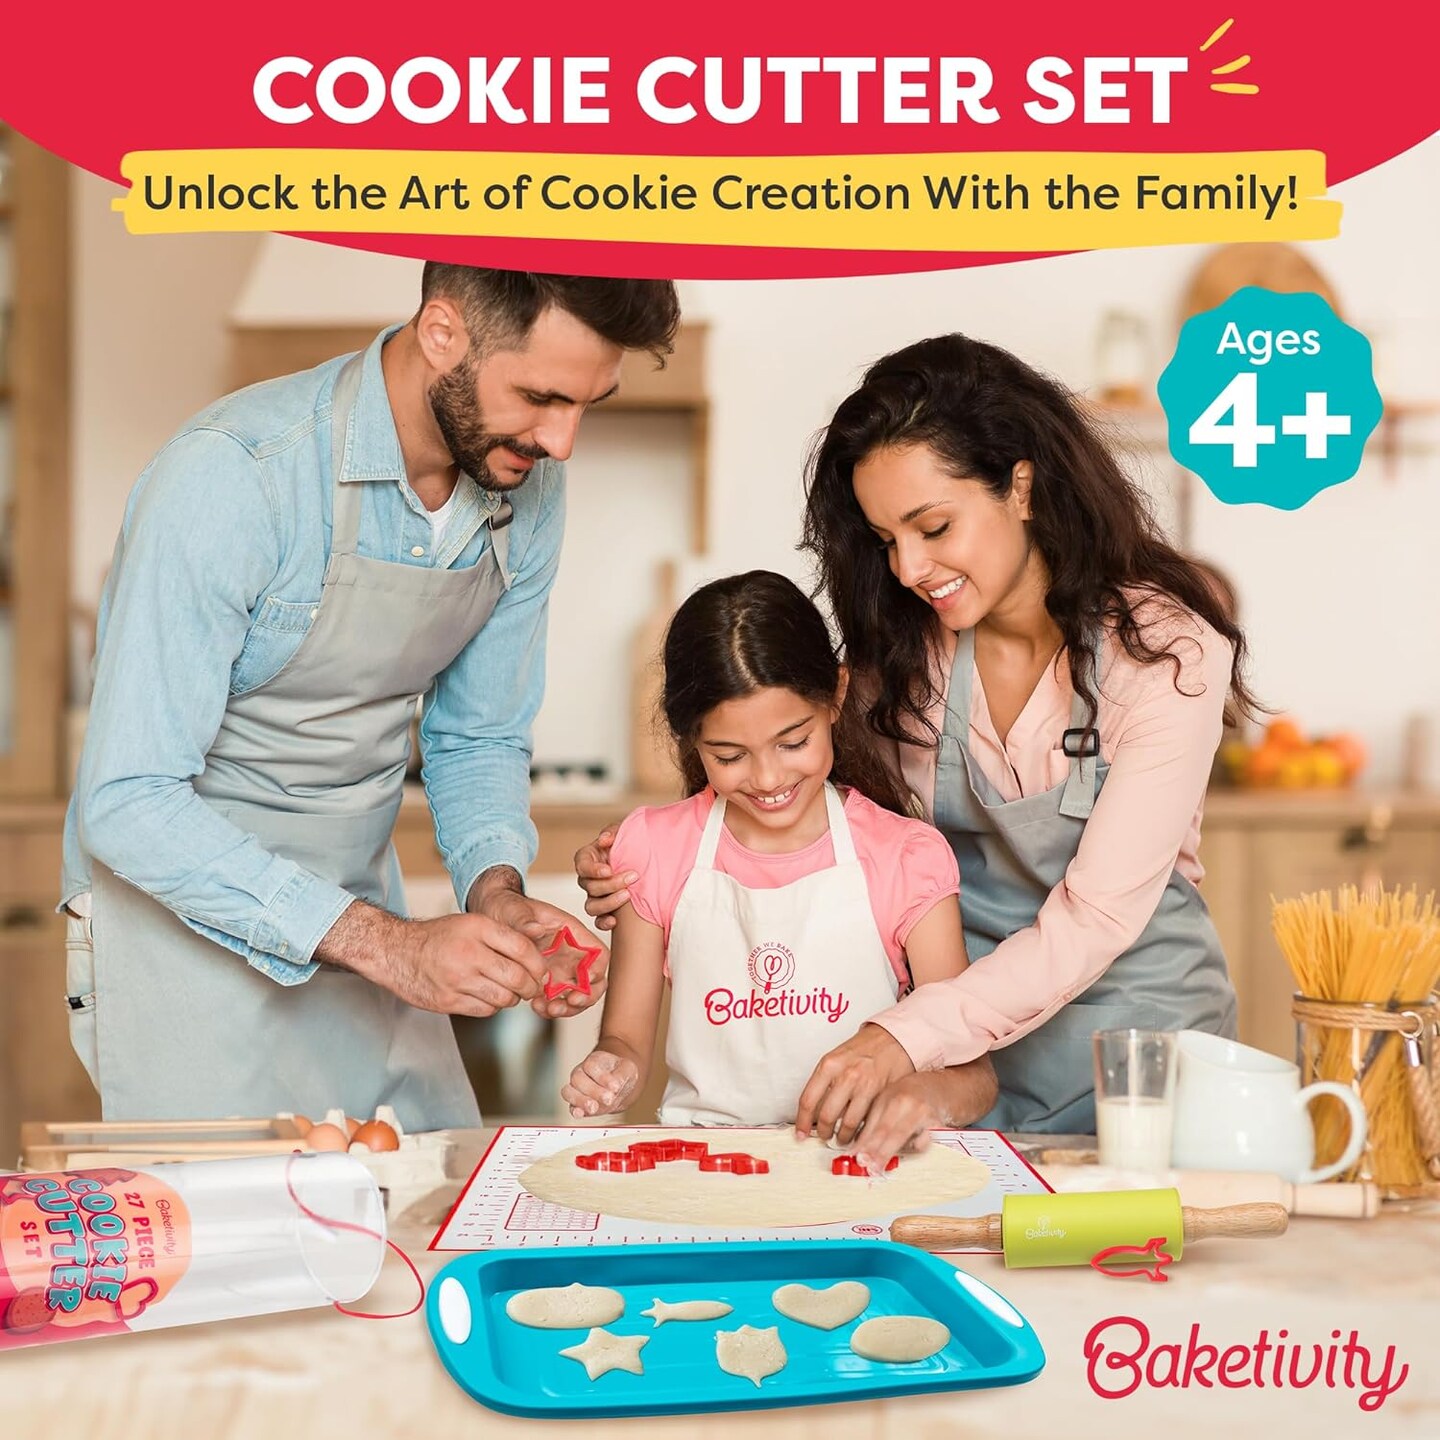 Baketivity Cookie Cutter Set For Kids, 24 Assorted Cookie Cutters of Basic Shapes, Seasonal, and Holiday Themes - With Rolling Pin, Silicone Baking Pan, and Non-Stick Baking Mat - BPA-Free - Ages 4+